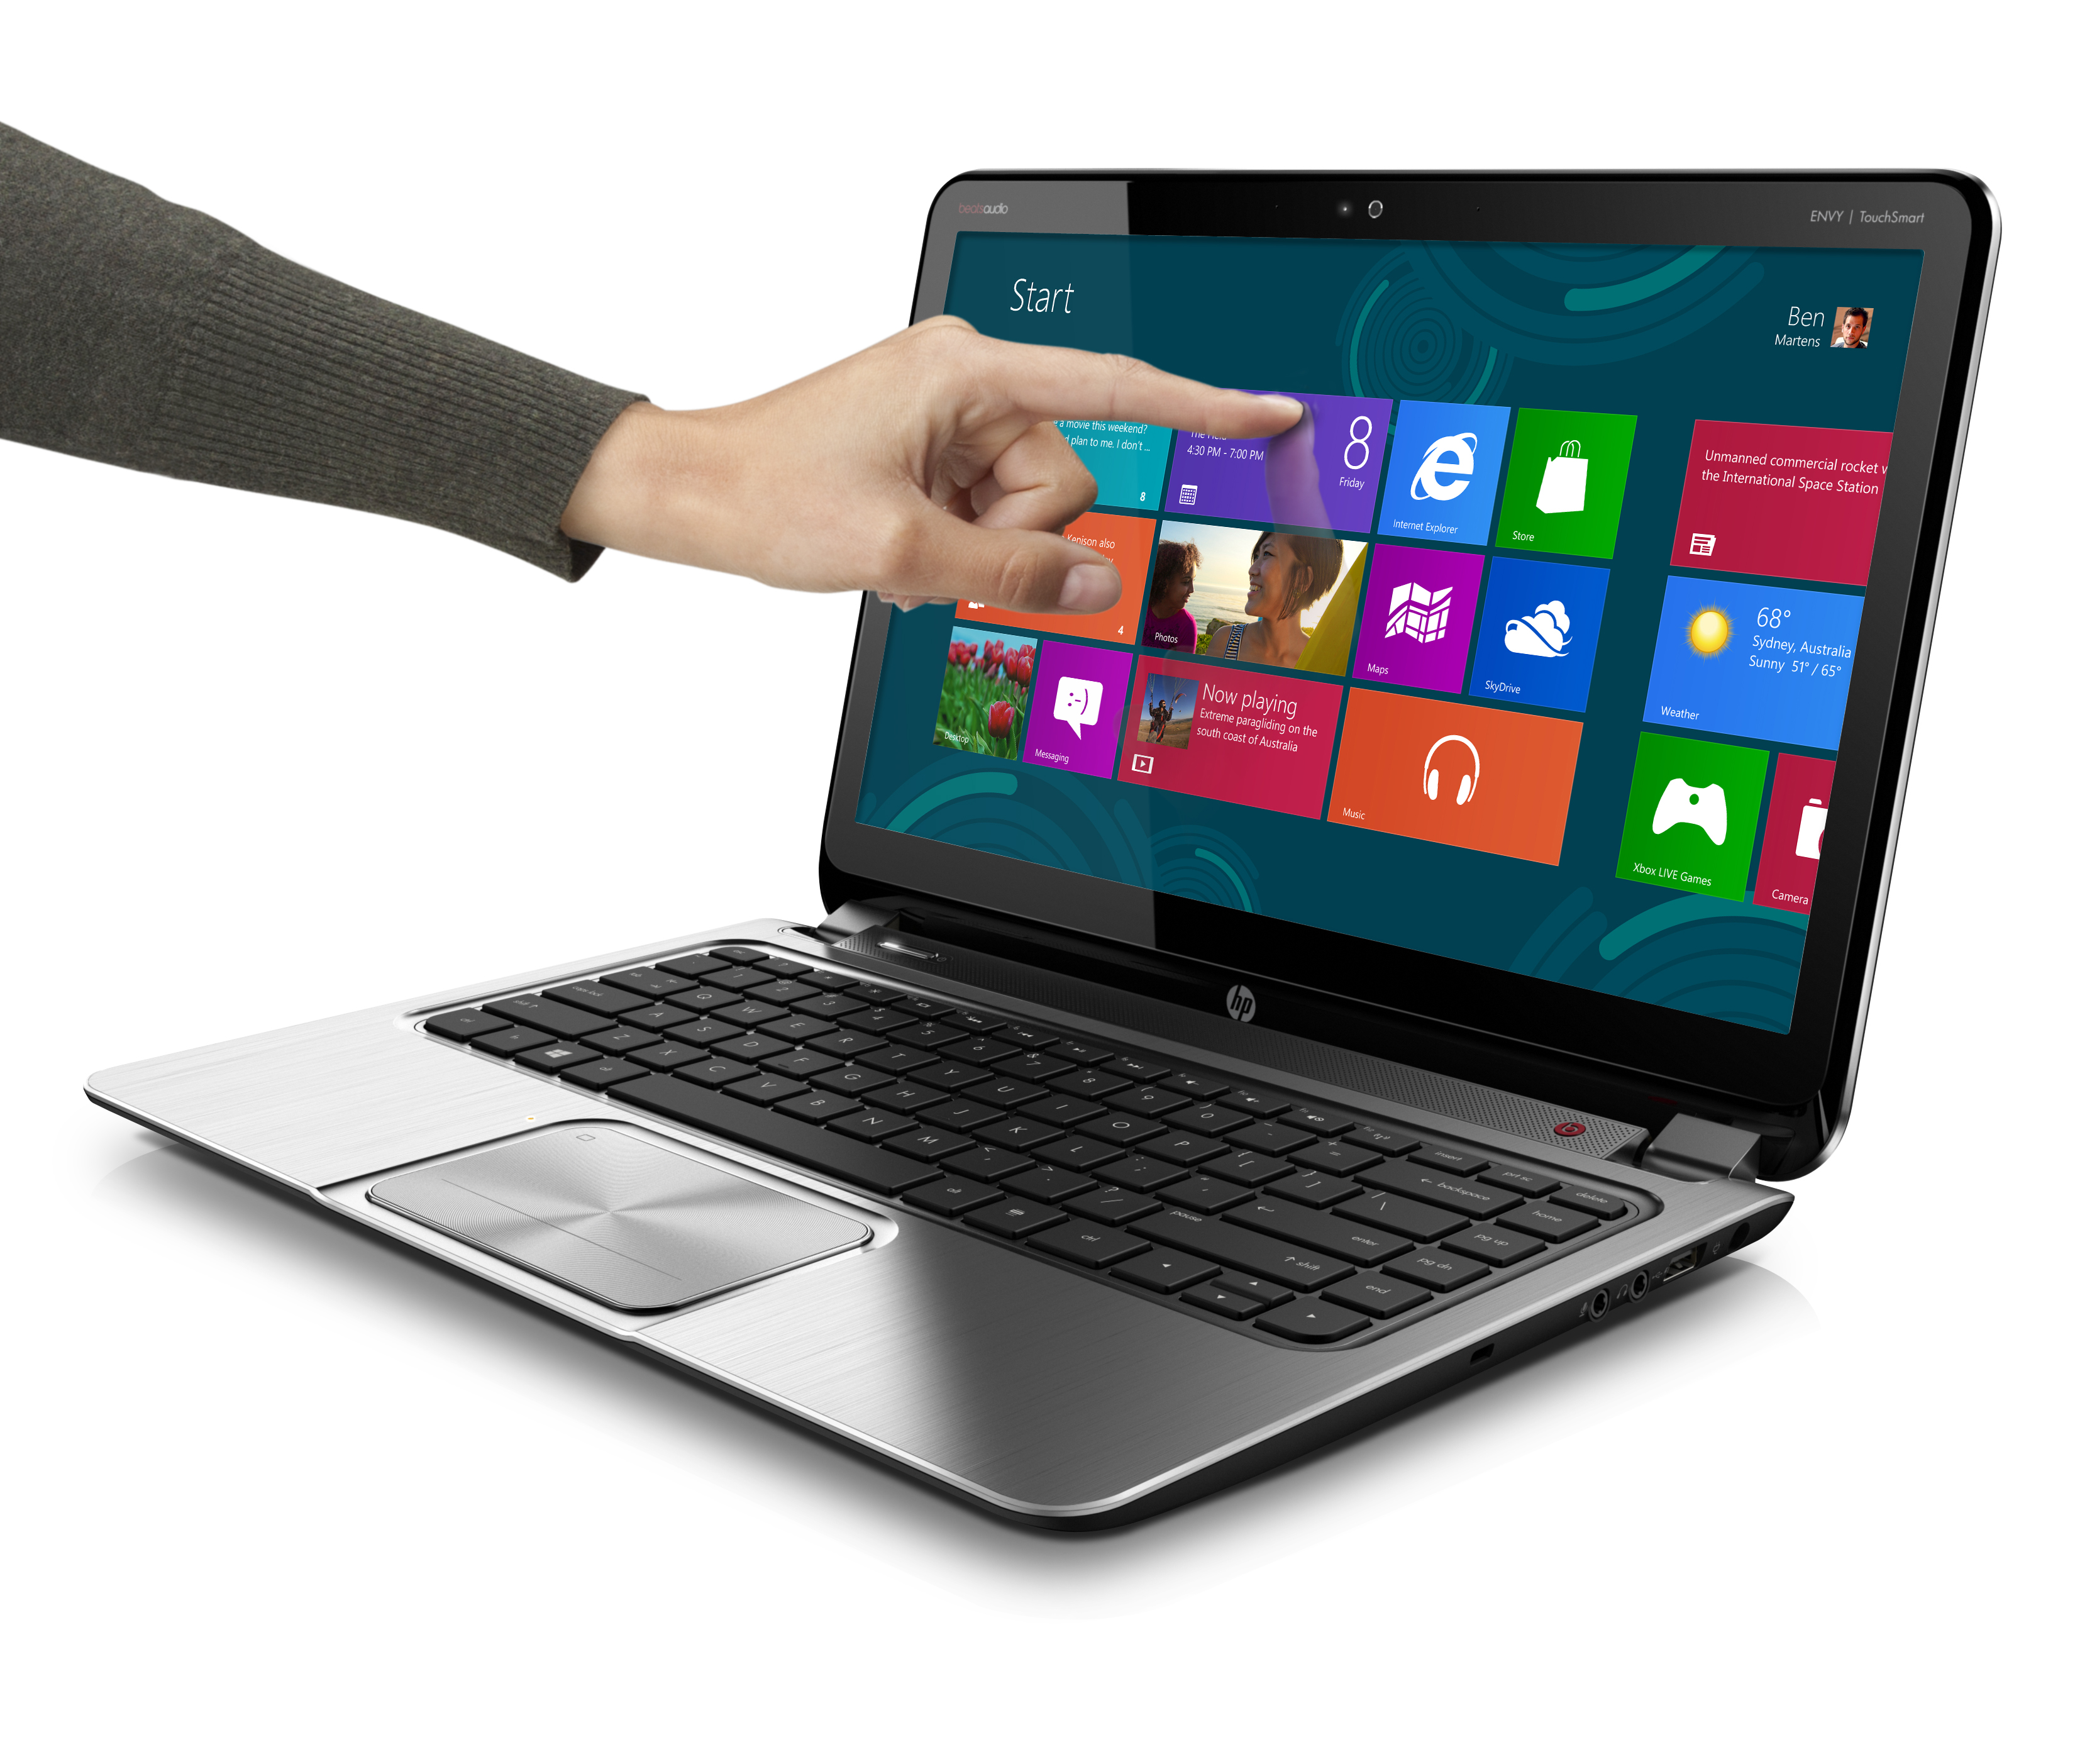 Possible End of the Road for Windows 8 Hybrids